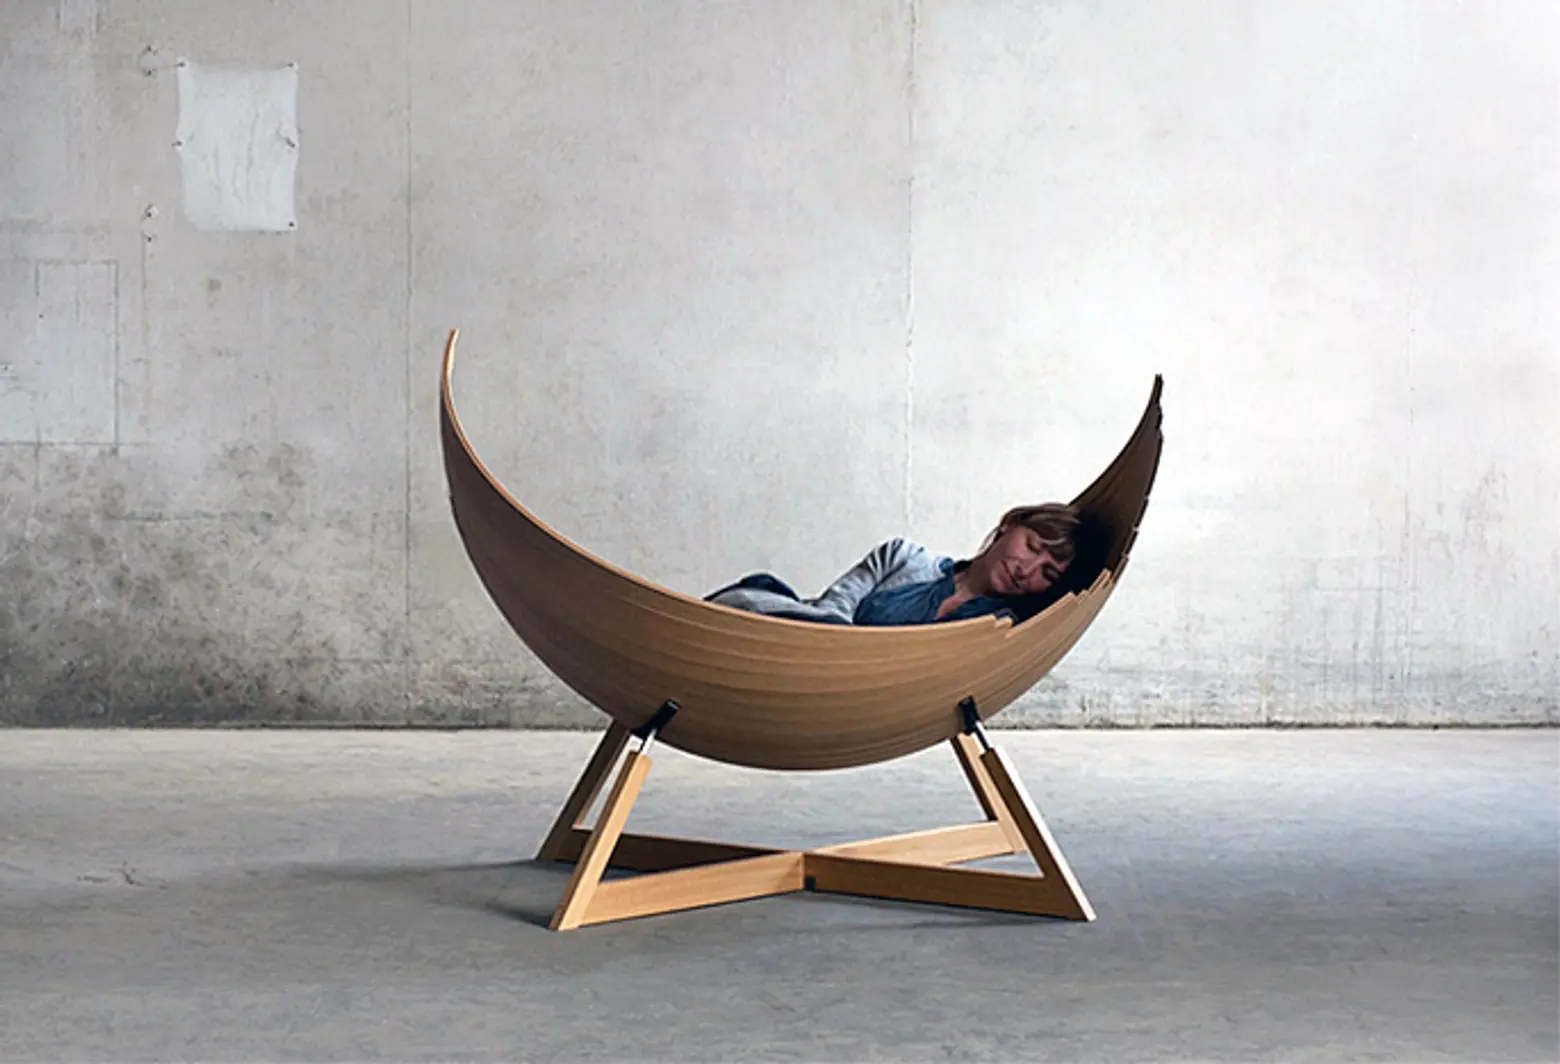 Viking-Inspired Barca Bench Fuses Furniture with Boat Building Techniques